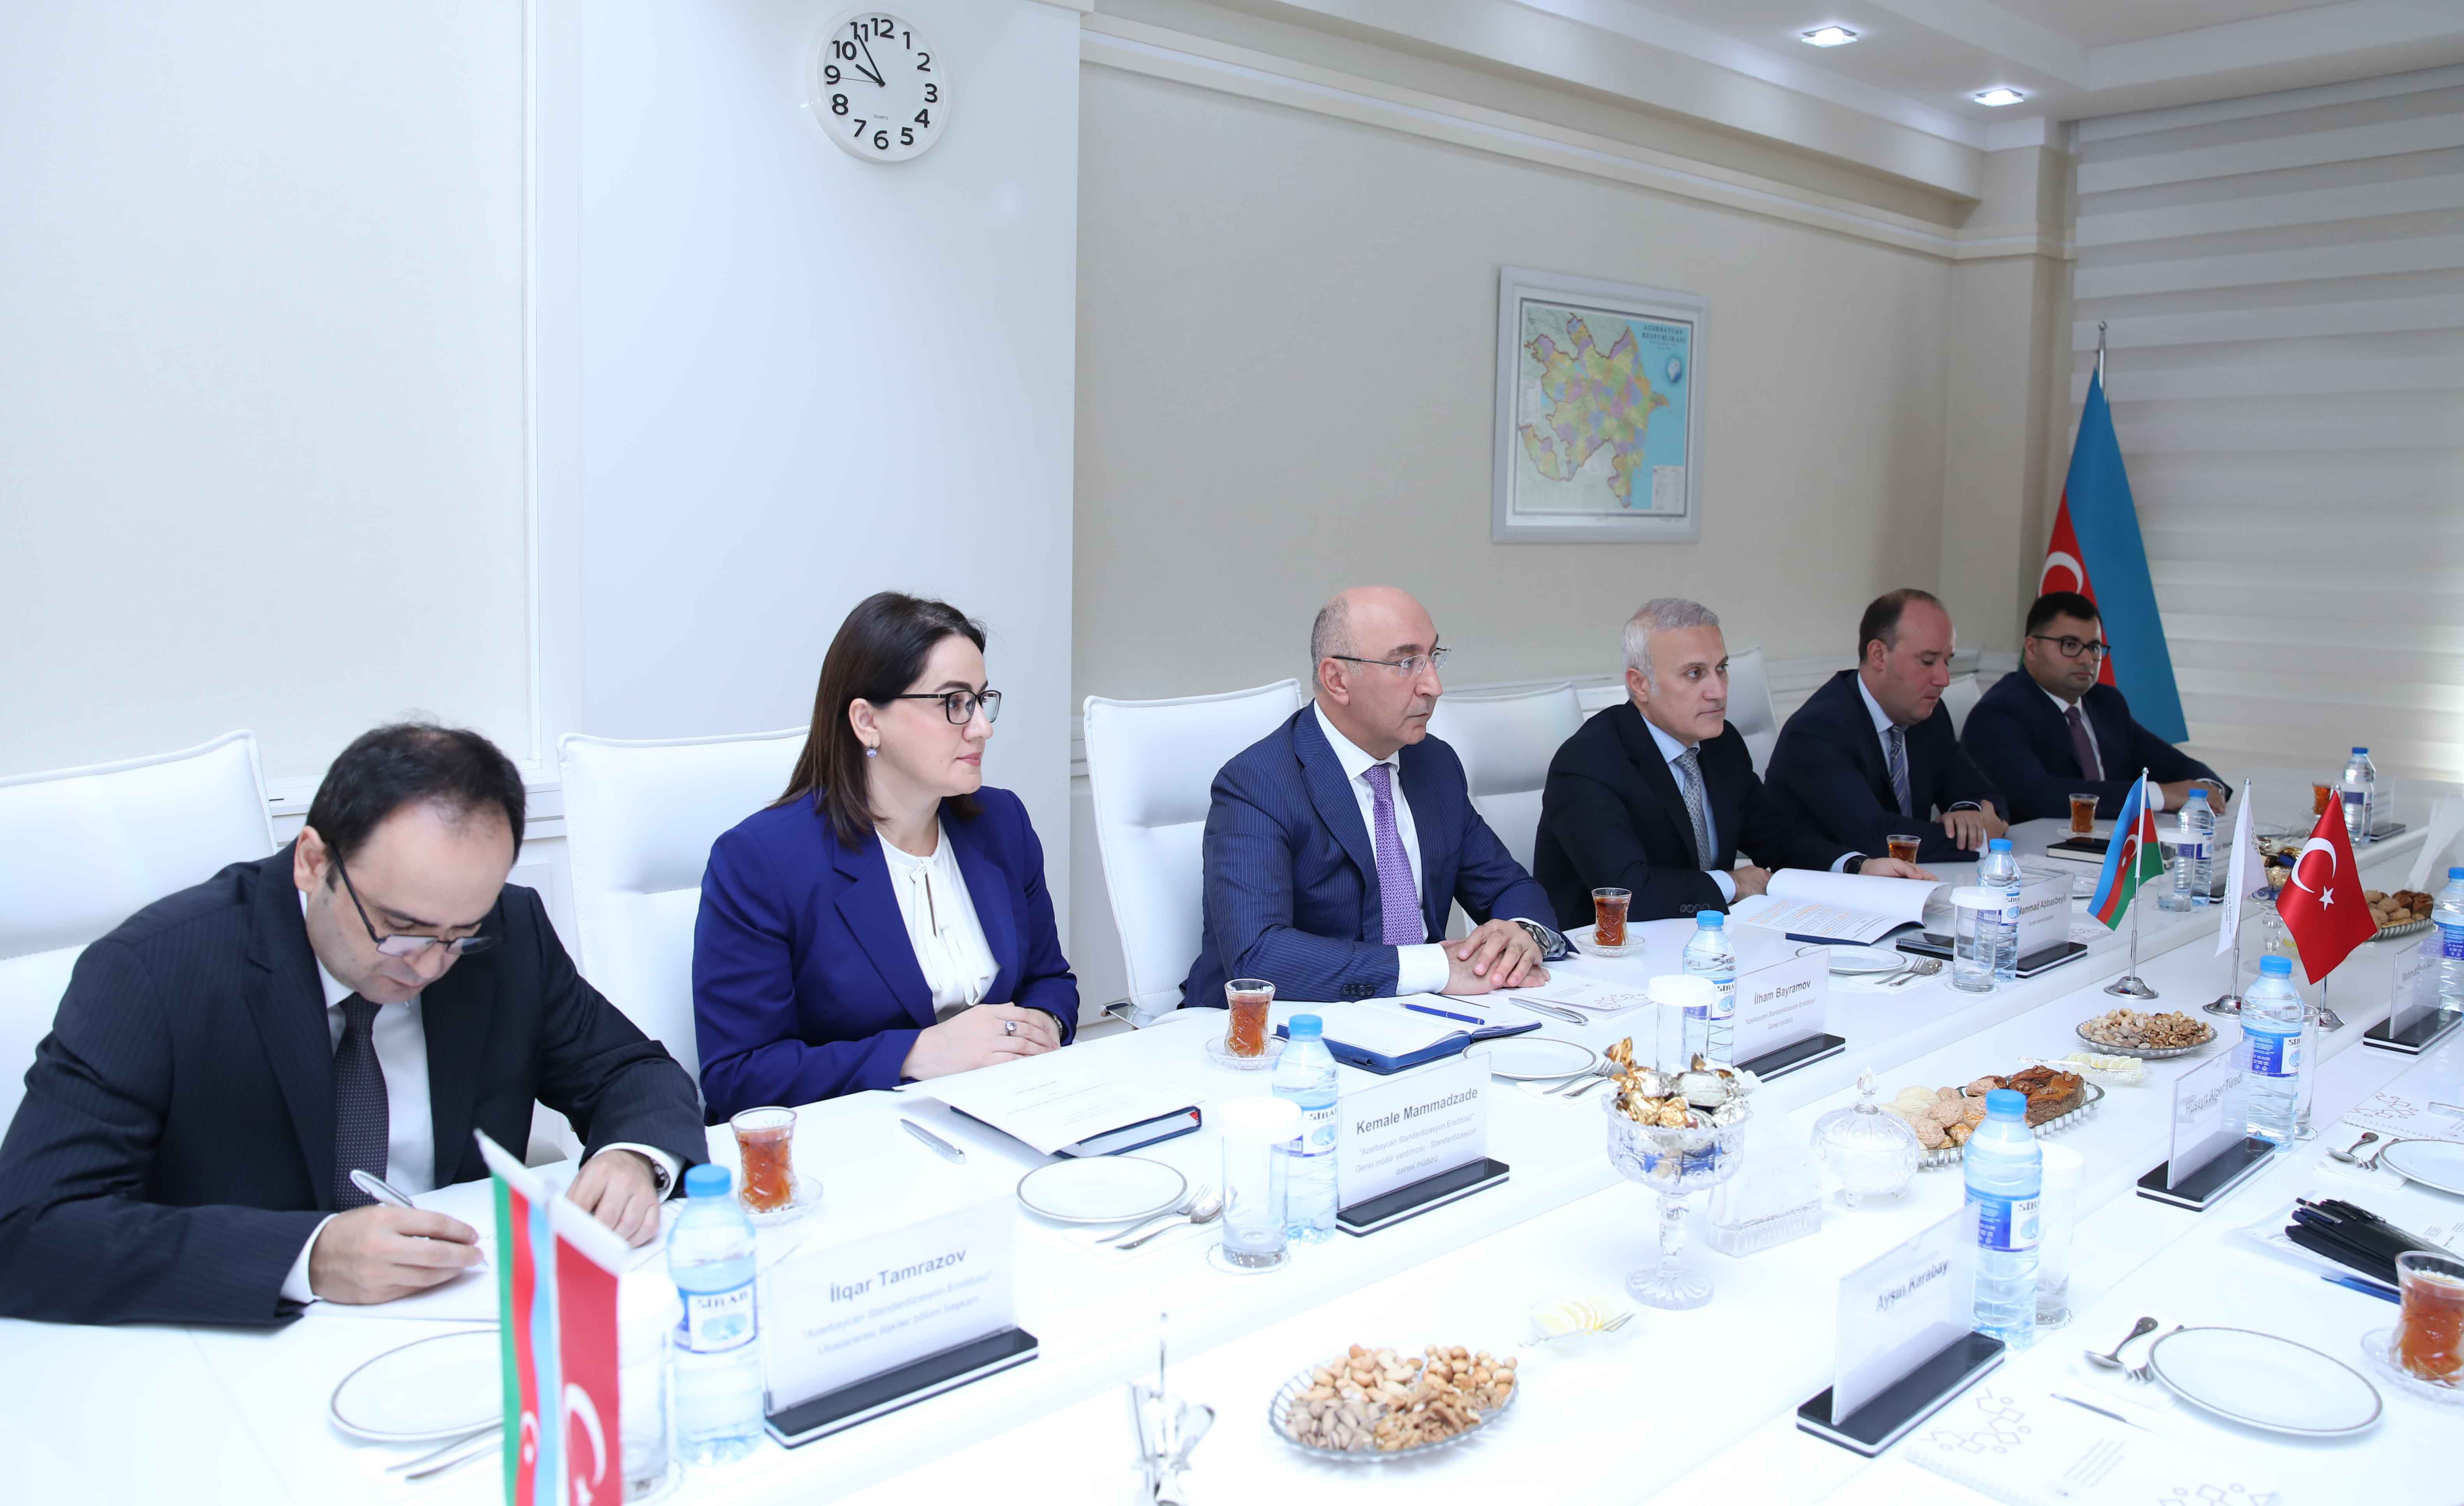 Meeting with the representatives of the Turkish Standards Institution